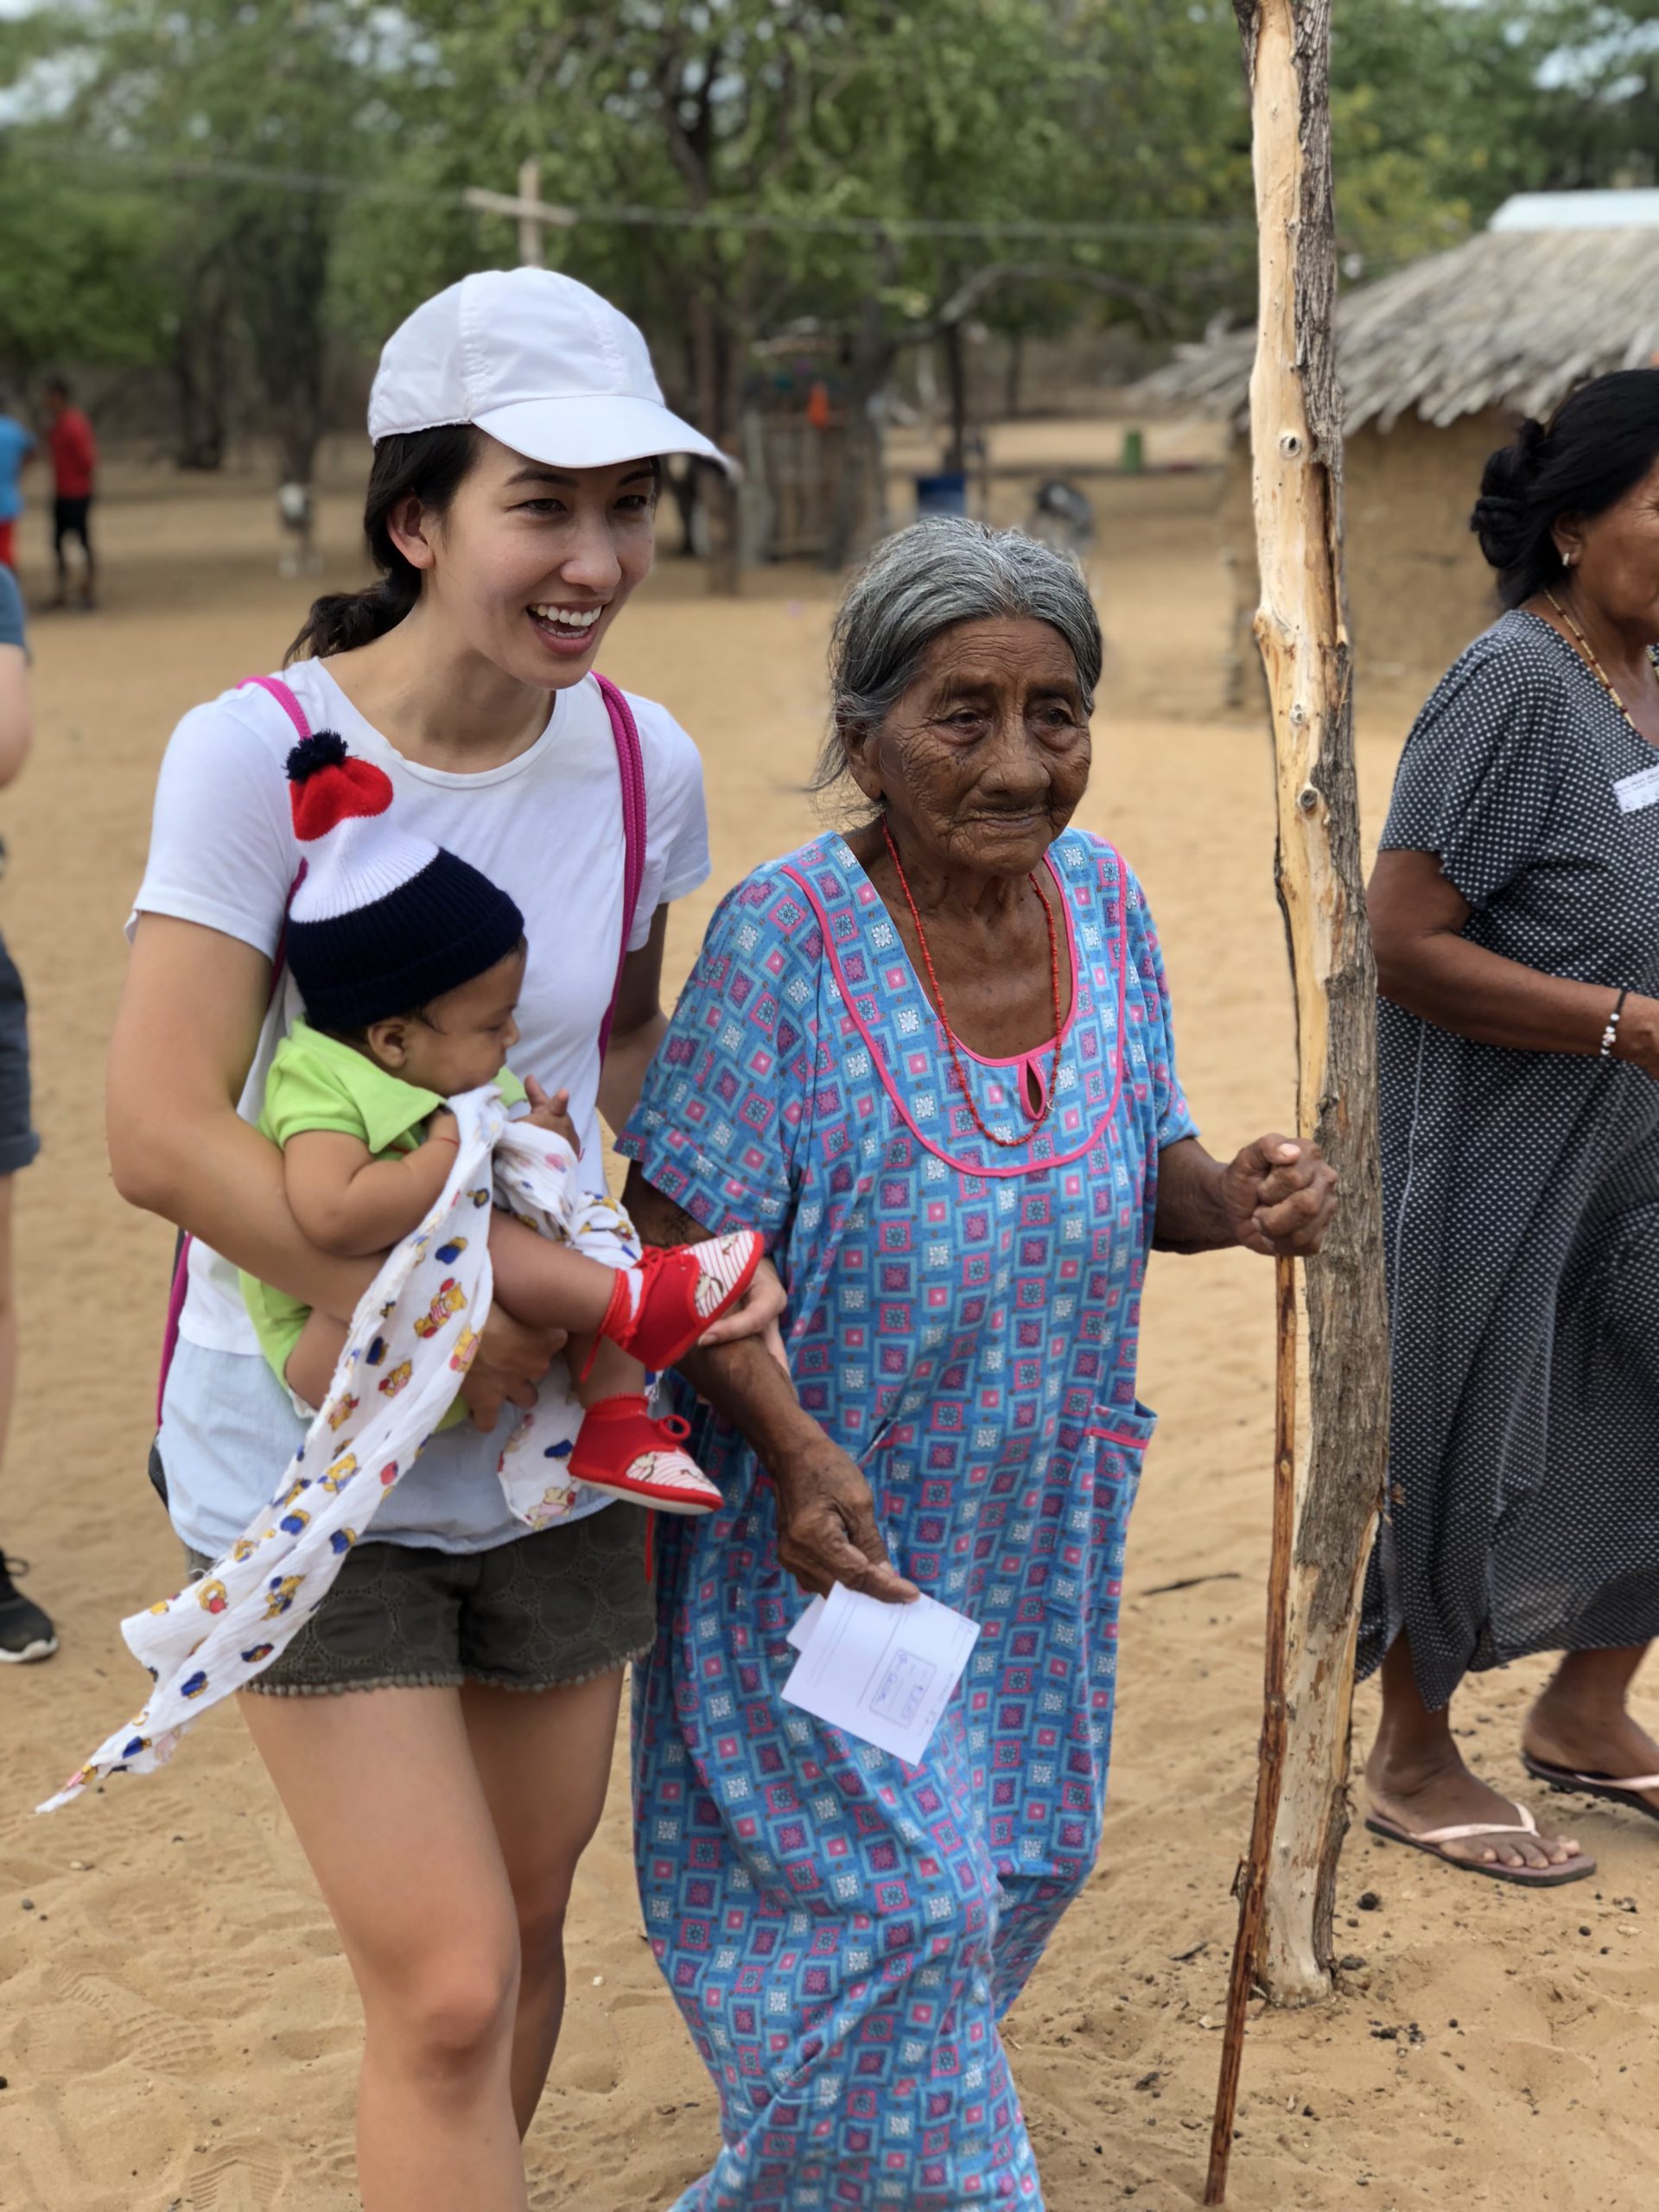 A team member of New Mercy Community Church with an elderly lady and a baby -BOH mission trip in La Guajira, Colombia.